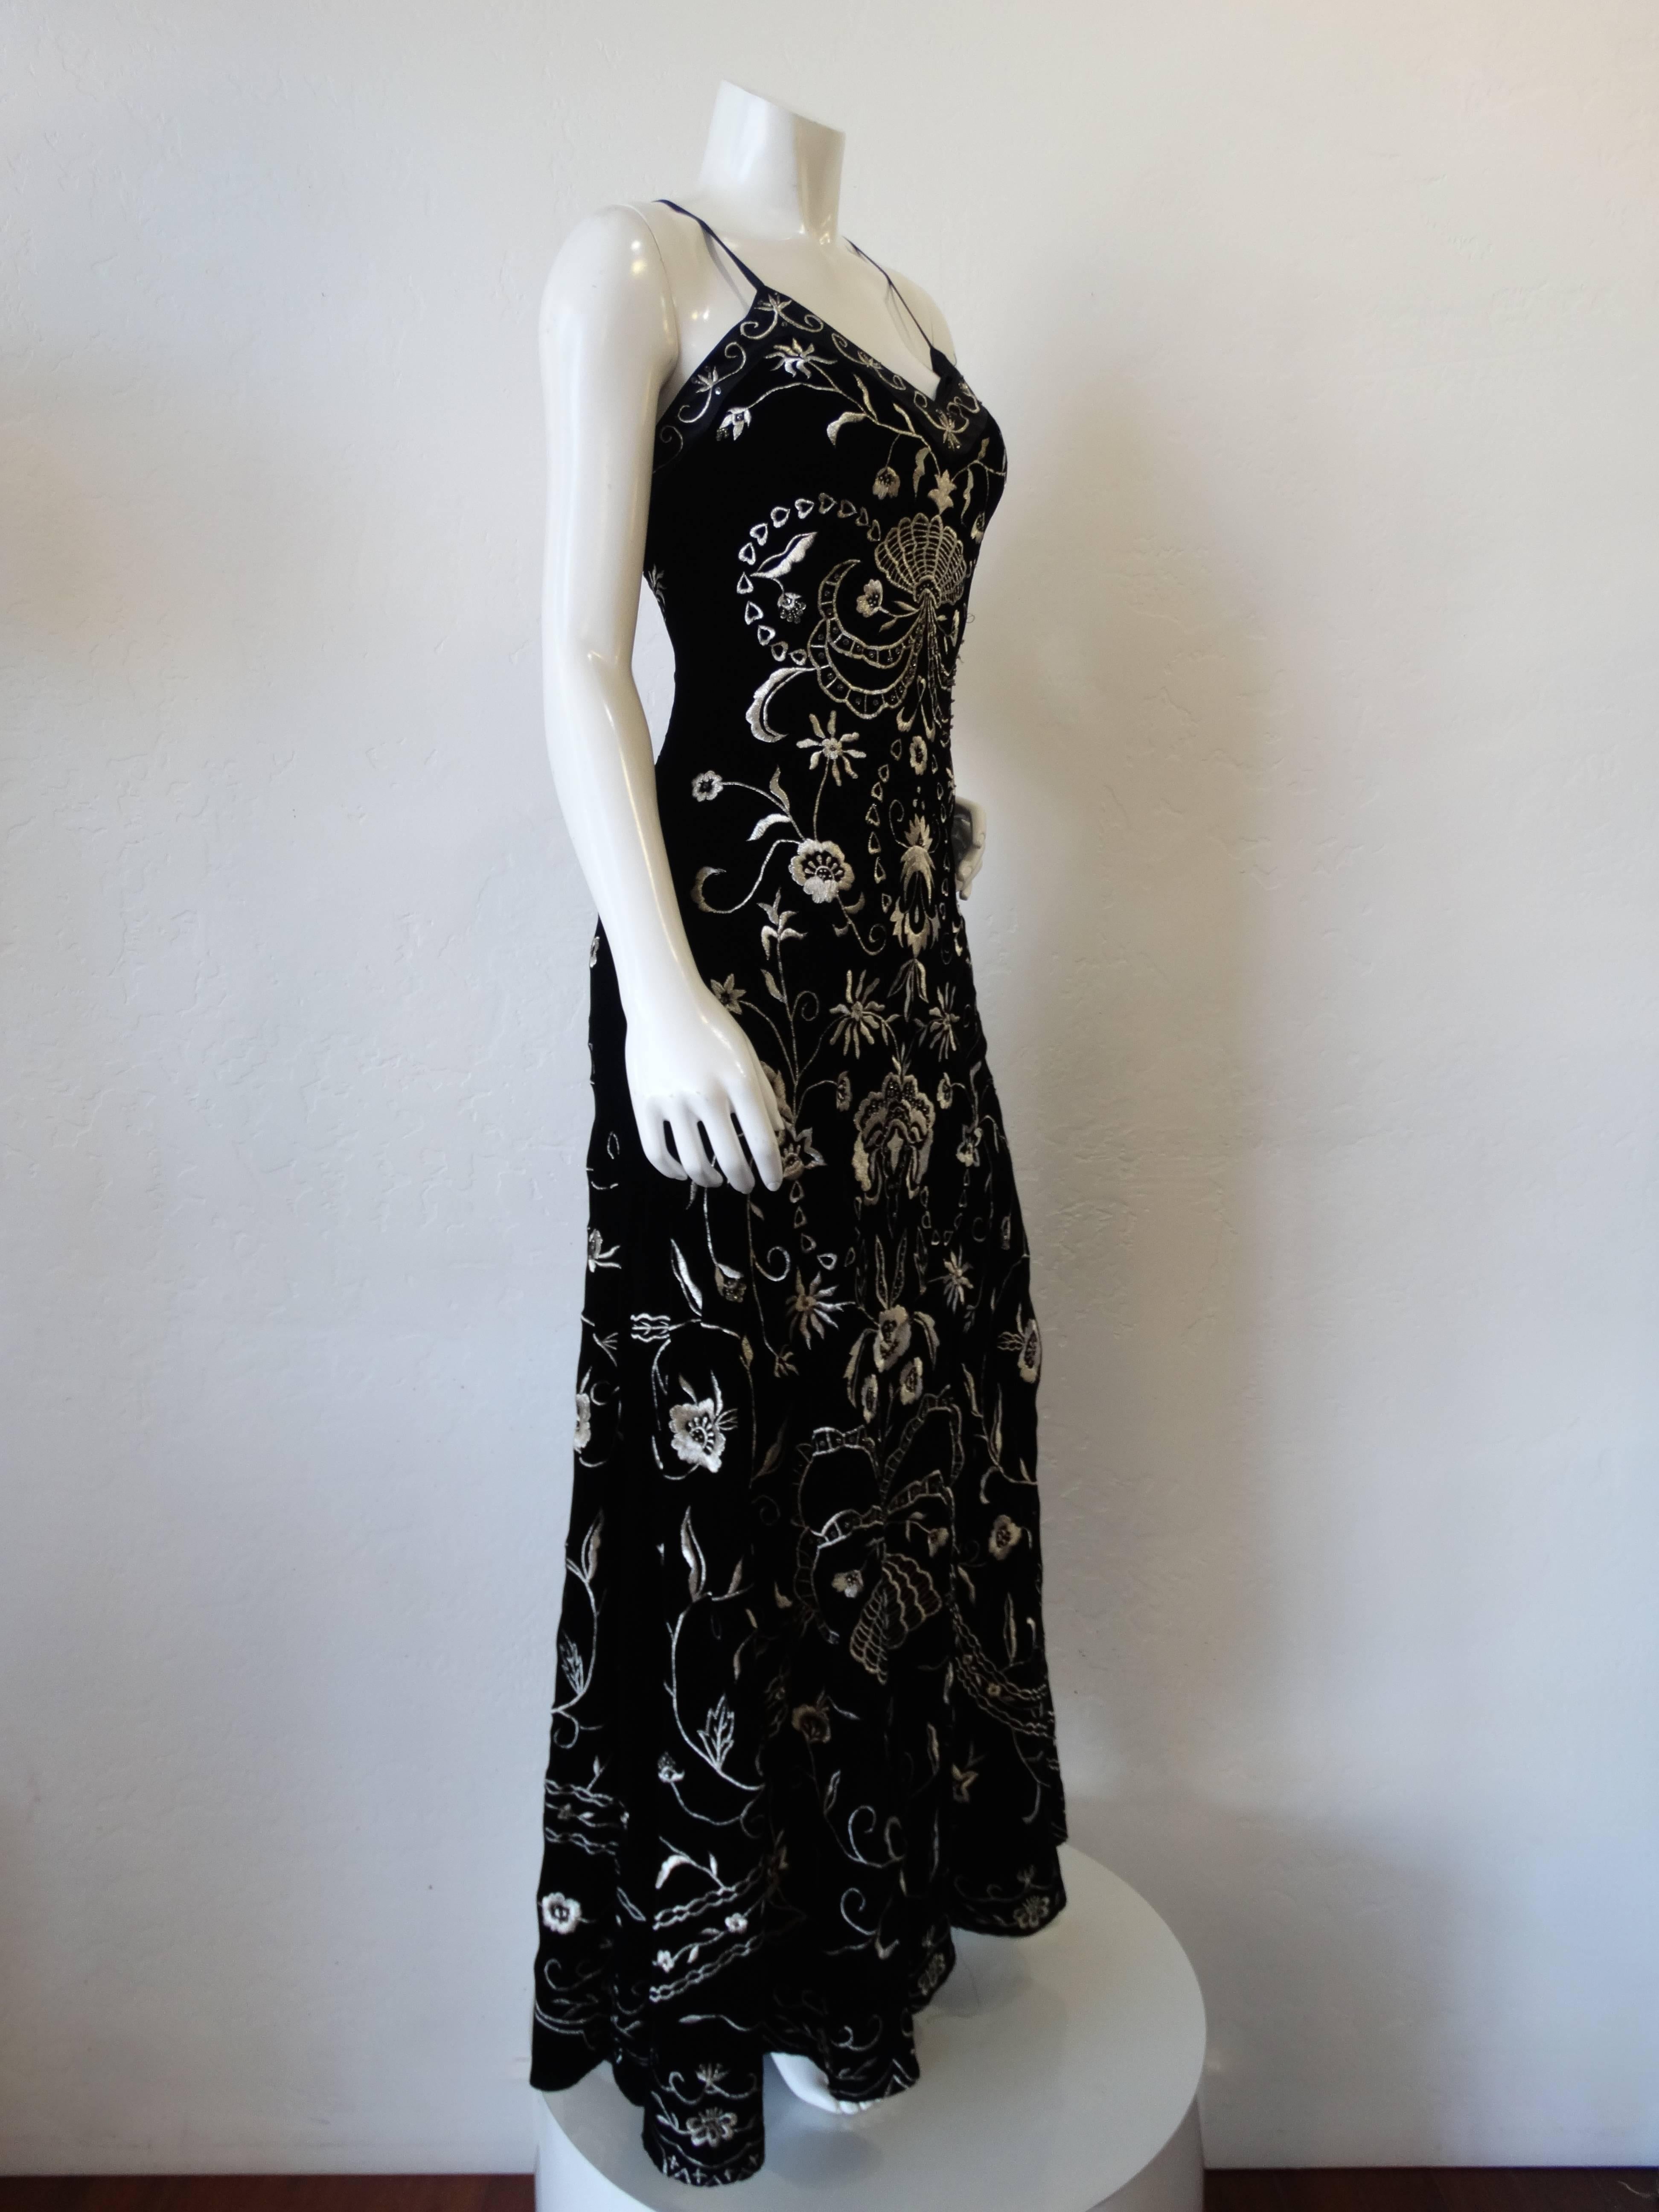 Incredible 1990s velvet dress from Sue Wong Nocturne! Slinky black velvet embroidered with silver botanical designs and beaded accents. V neckline with satin spaghetti straps. Supermodel length, goes right down to the shoes! Zips up the side.